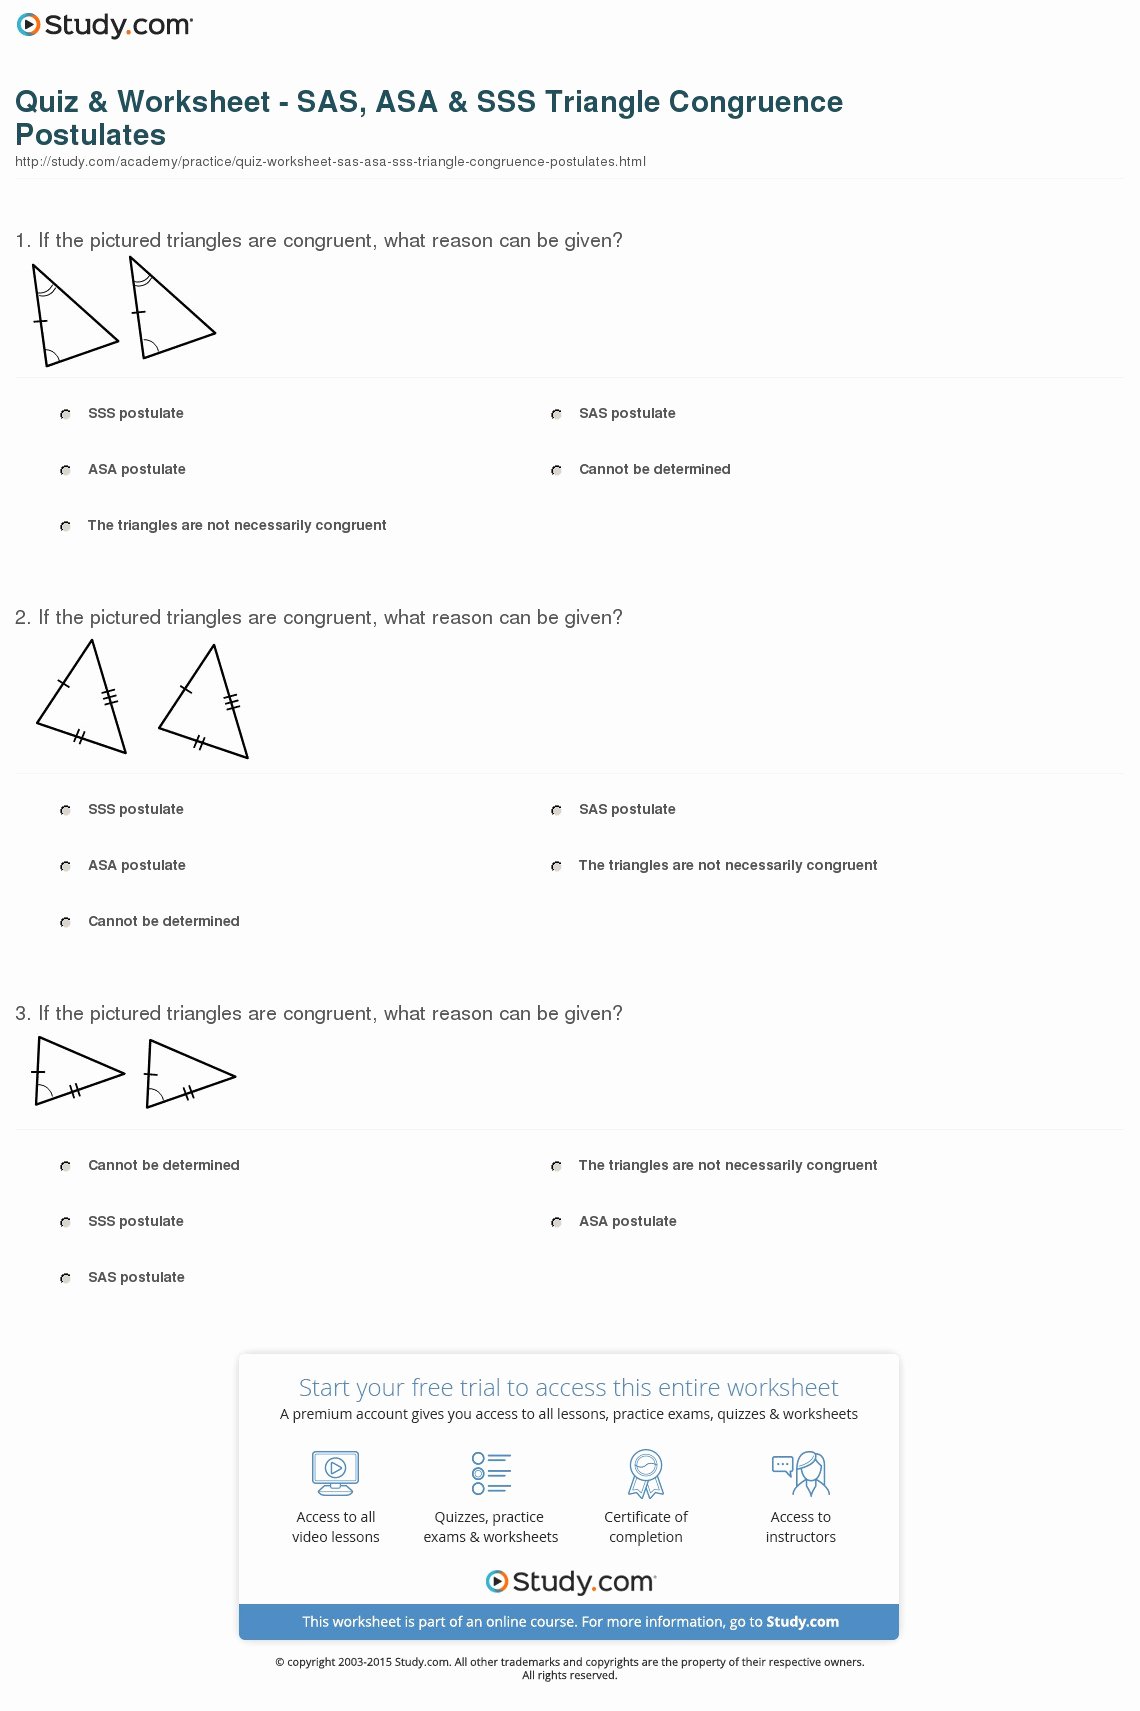 Congruent Triangles Worksheet with Answers Inspirational Quiz &amp; Worksheet Sas asa &amp; Sss Triangle Congruence